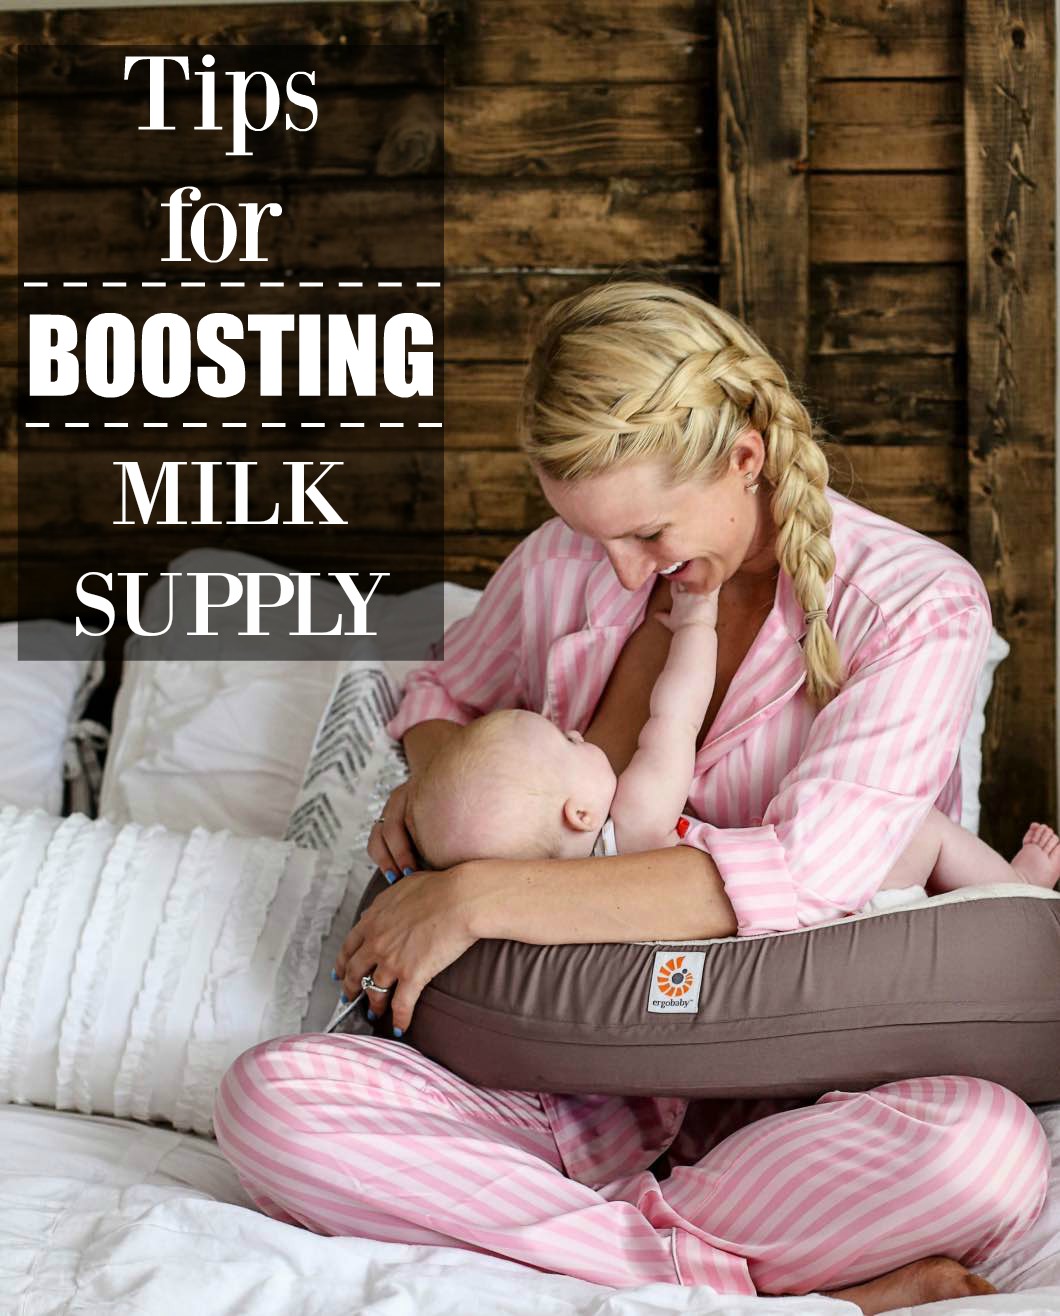 Tips for Boosting Milk Supply